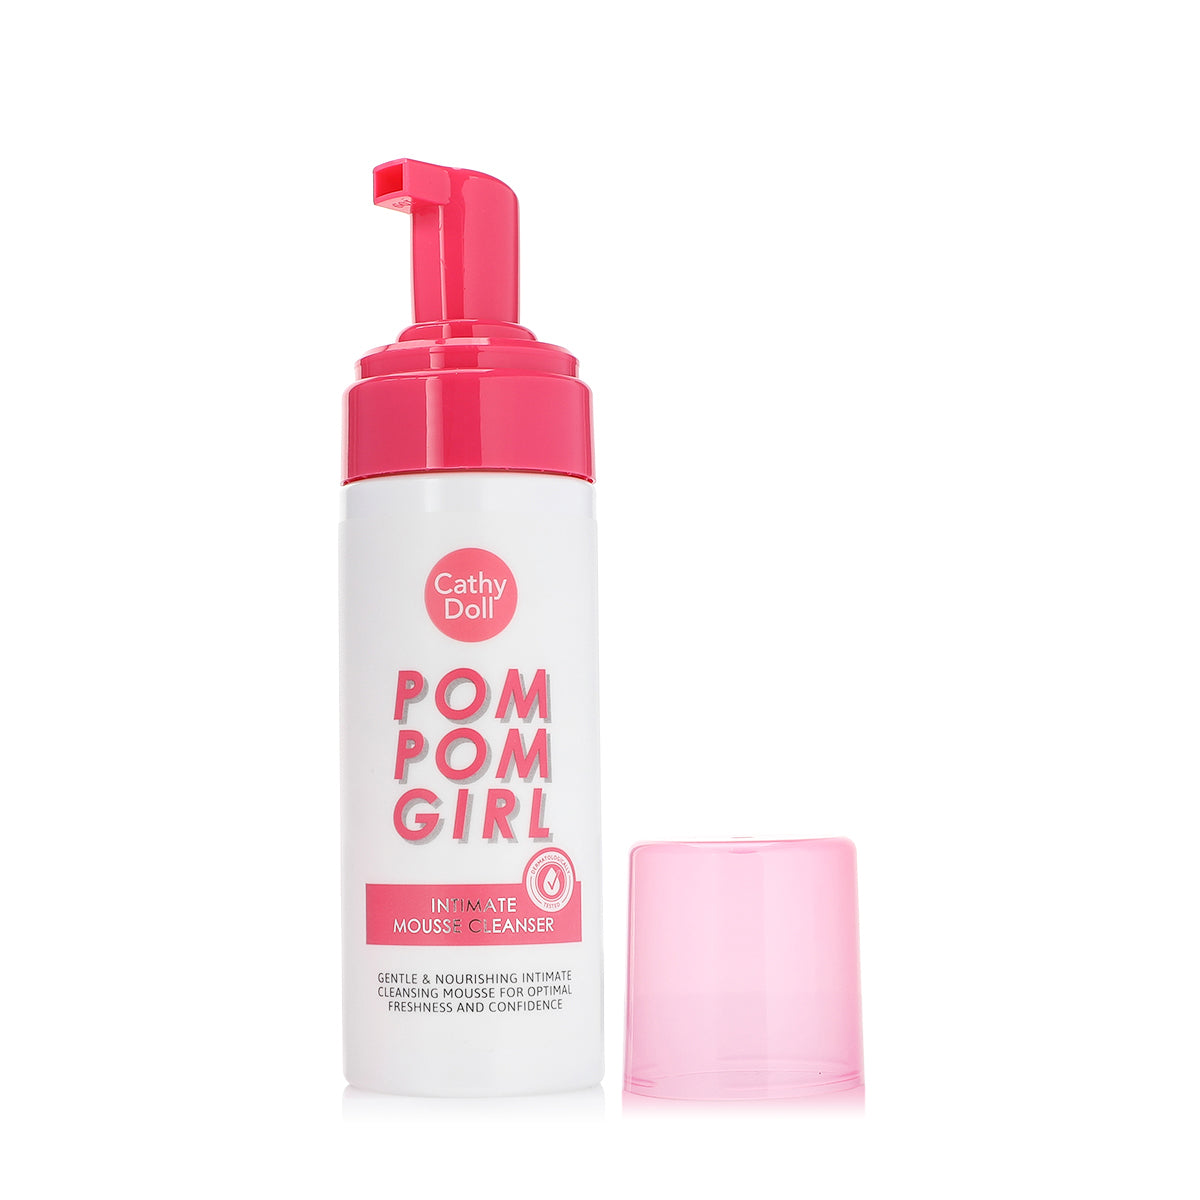 Cathy Doll Pom Pom Girl Intimate Mousse Cleanser - 150ml